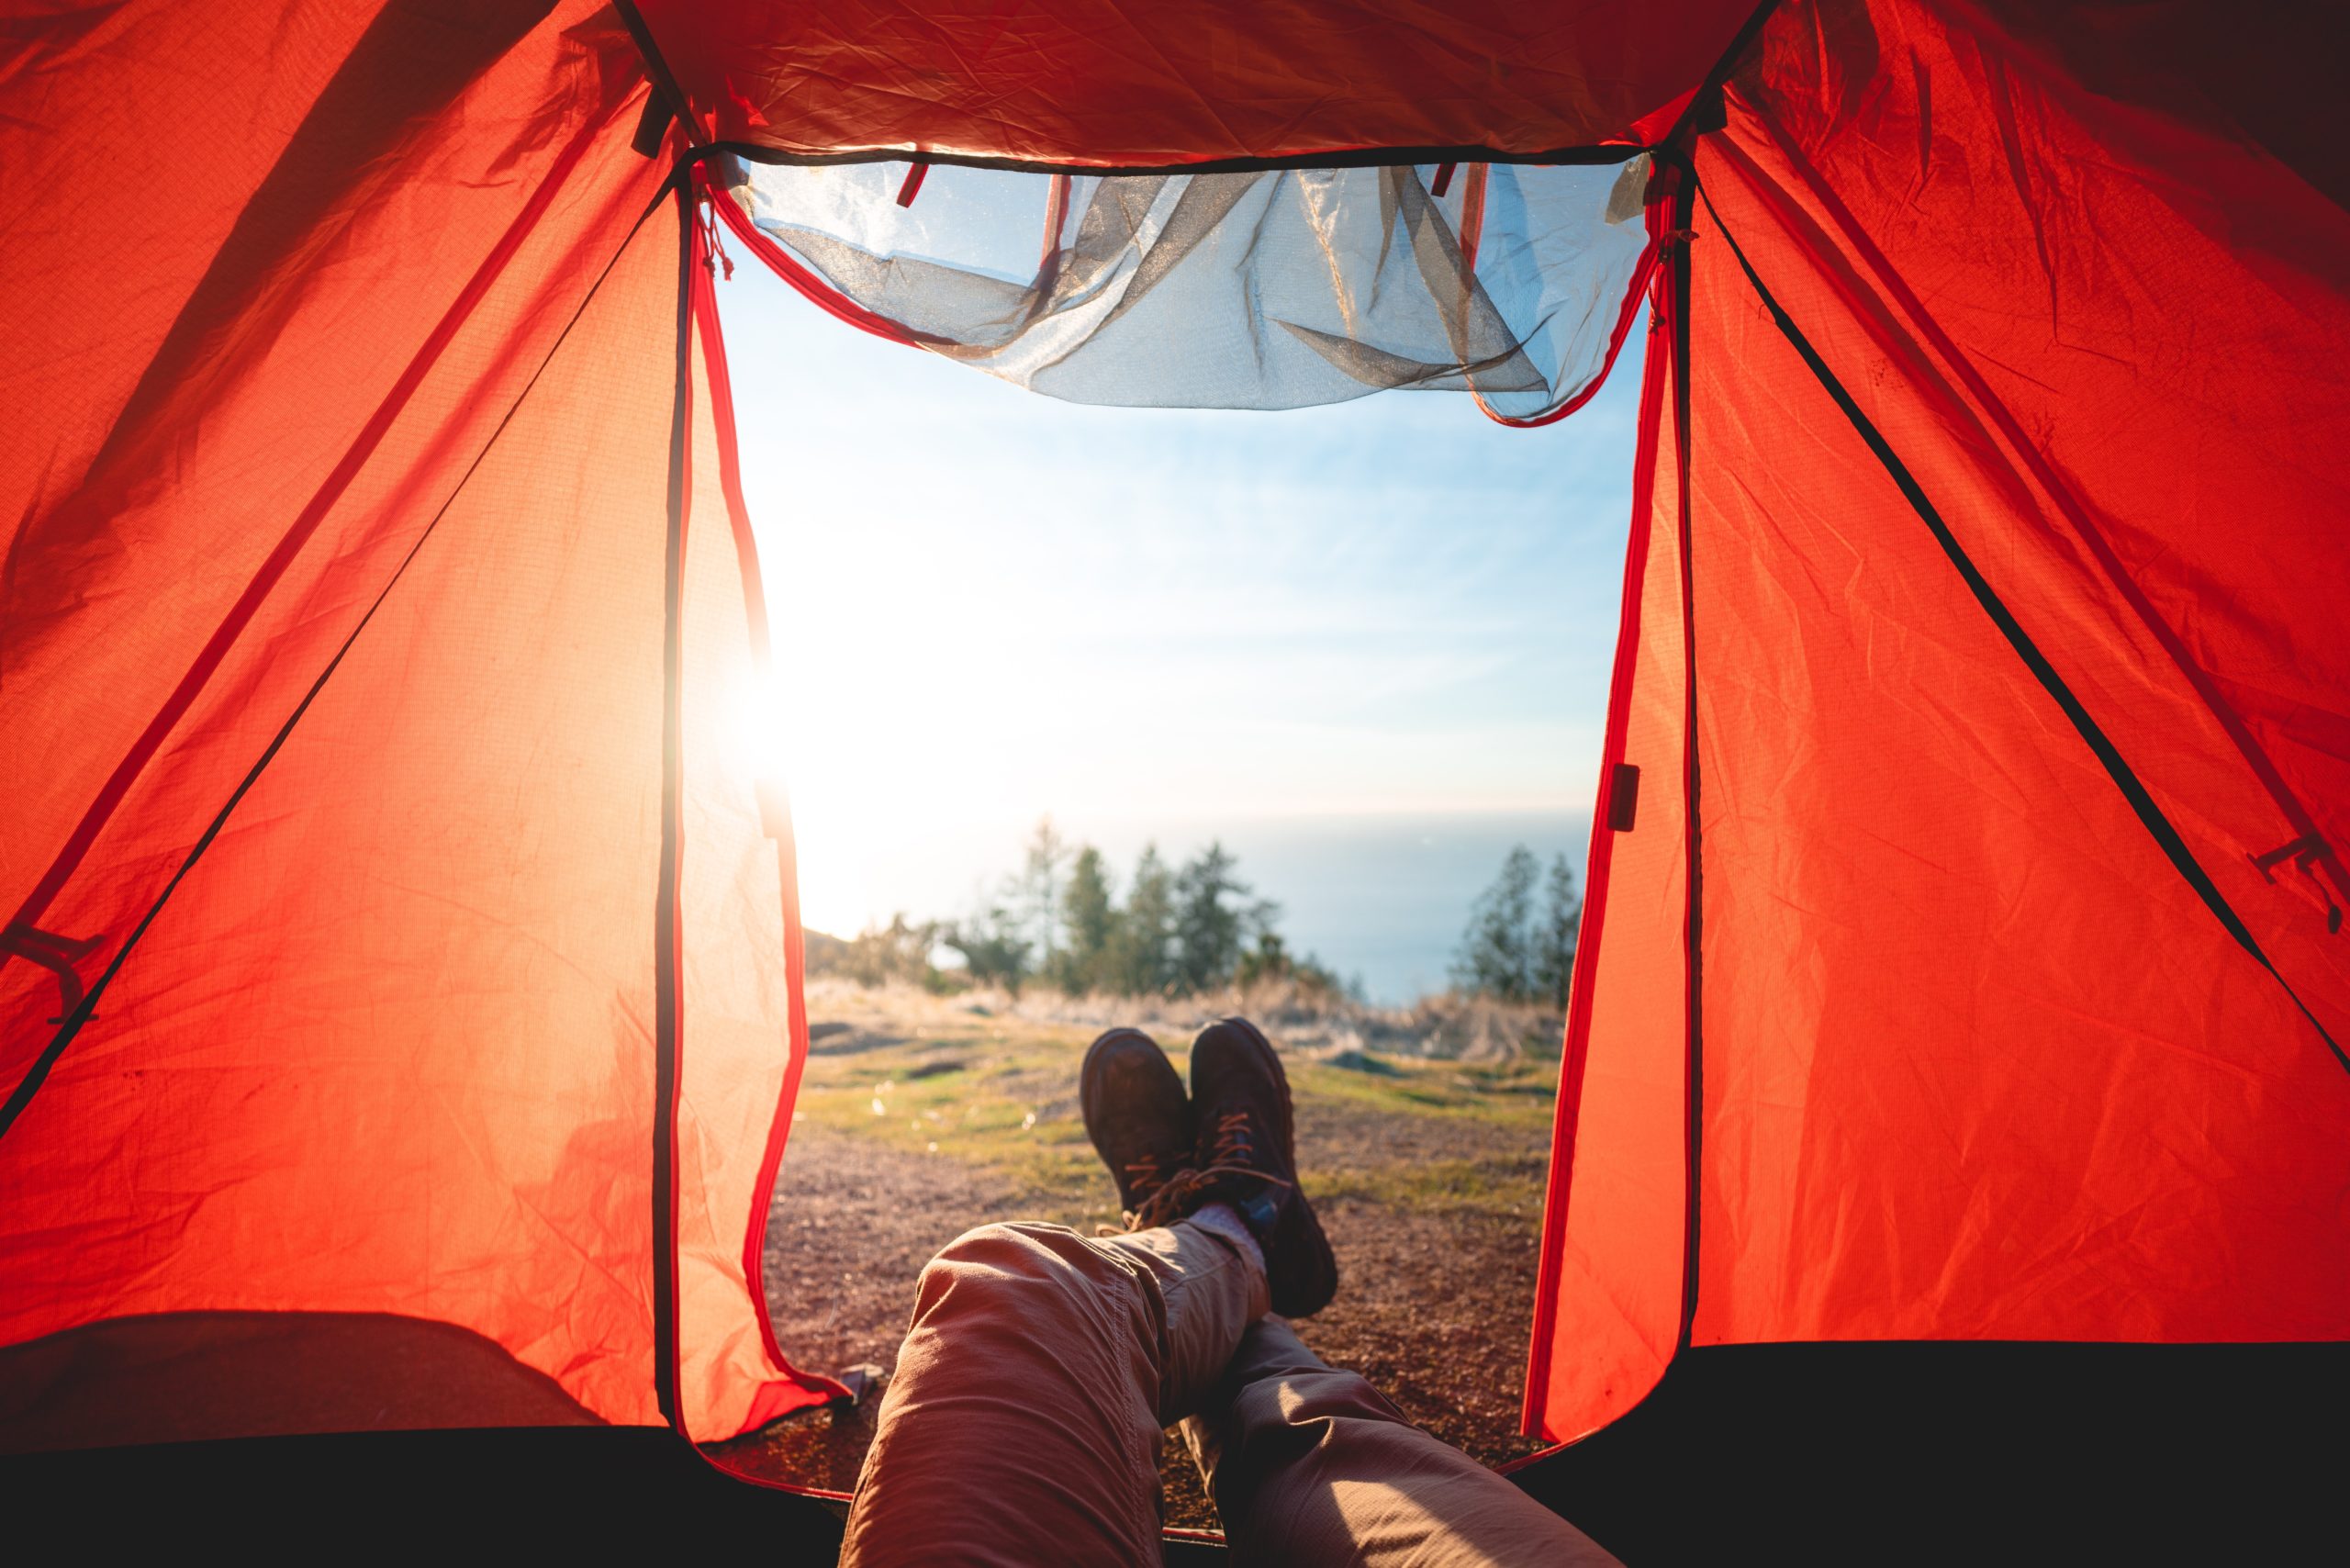 Feet poke out of a tent. Pine trees and the ocean are visible in the distance.